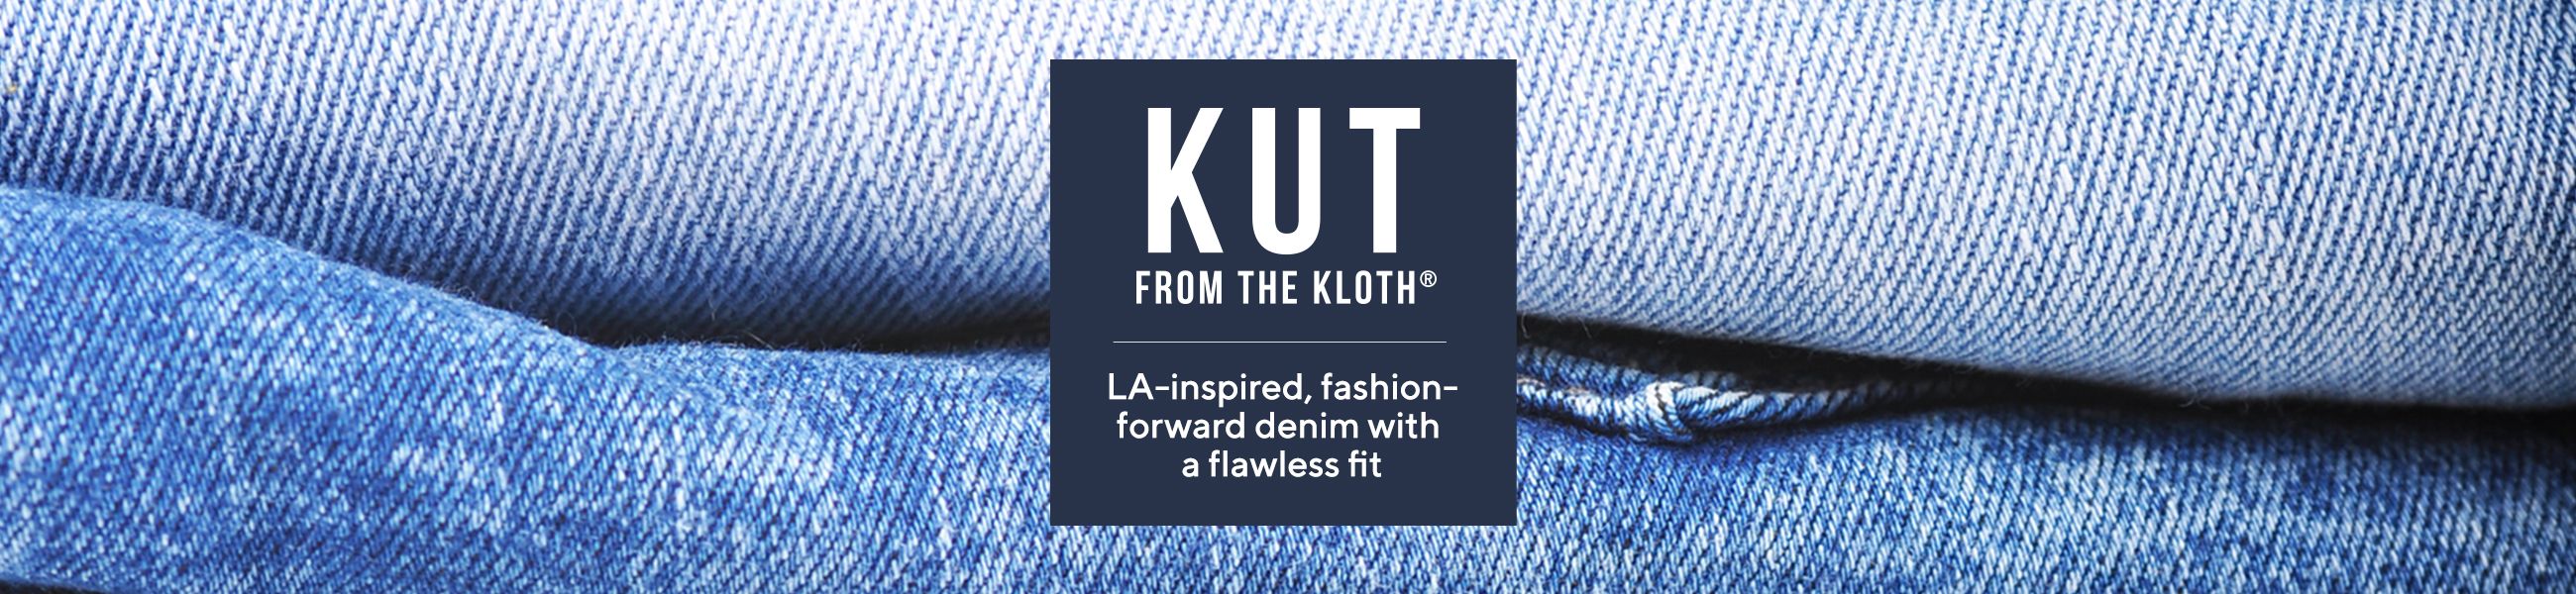 kut from the kloth colored jeans